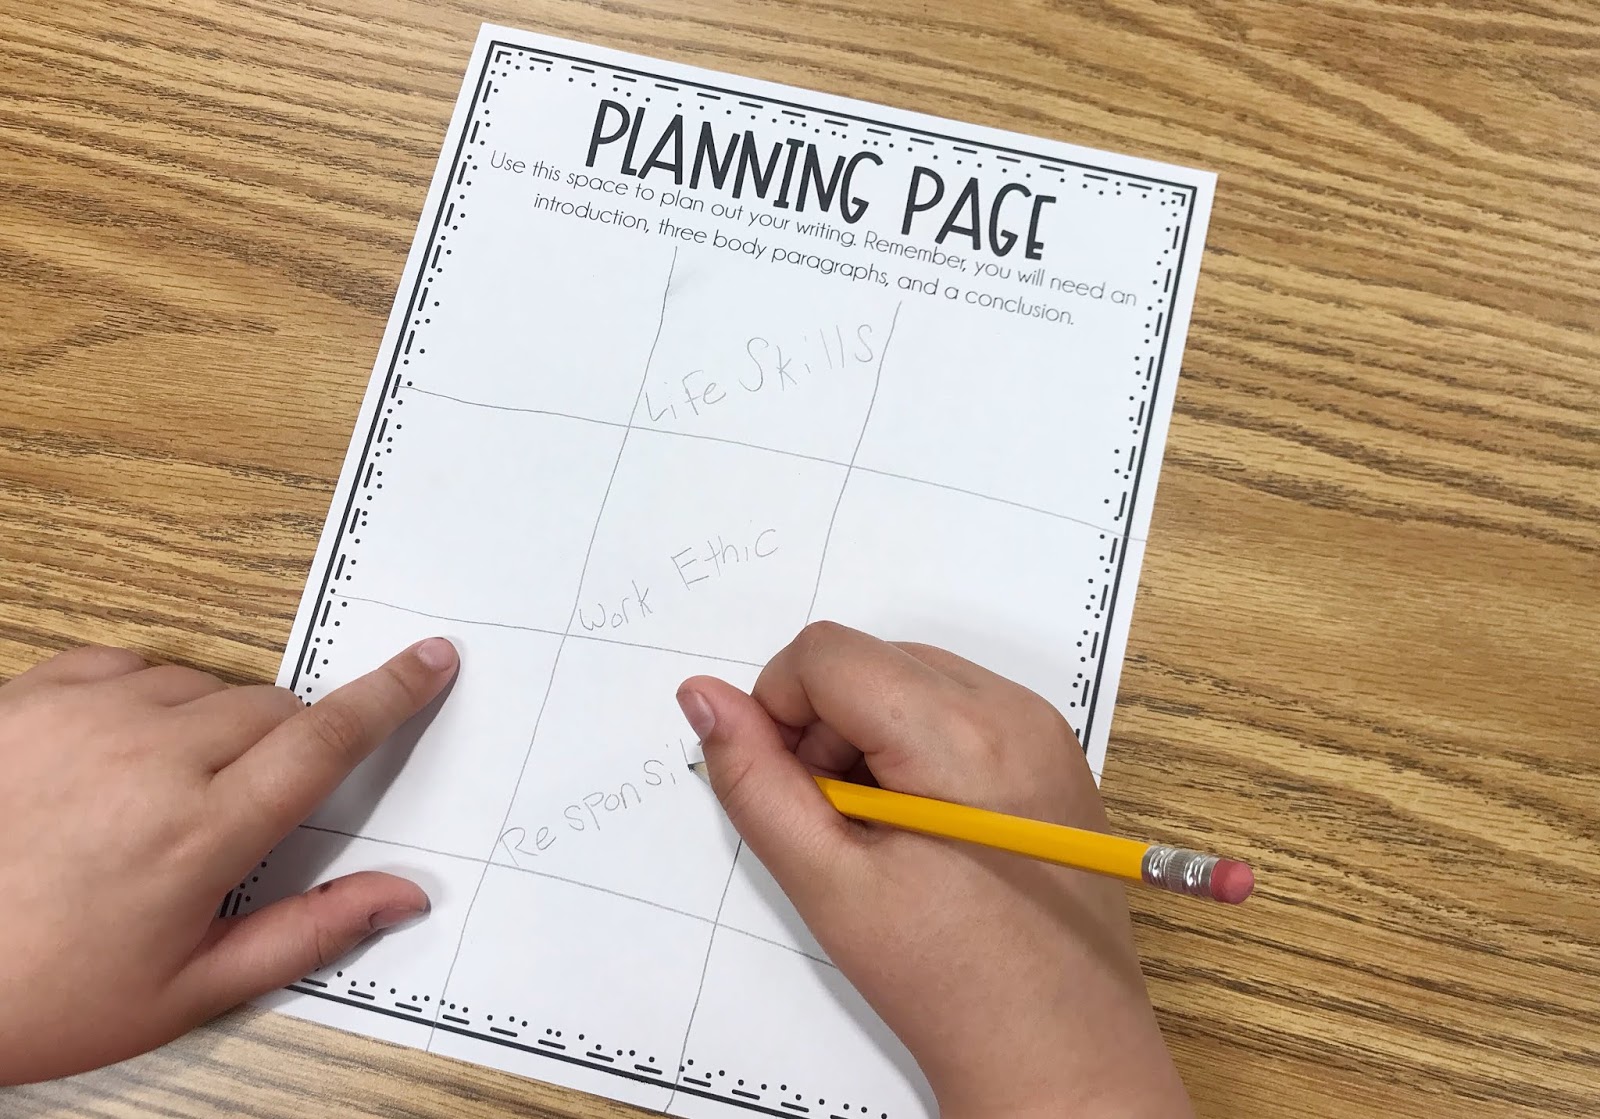 Student completing a Planning Page with their own graphic organizer drawn